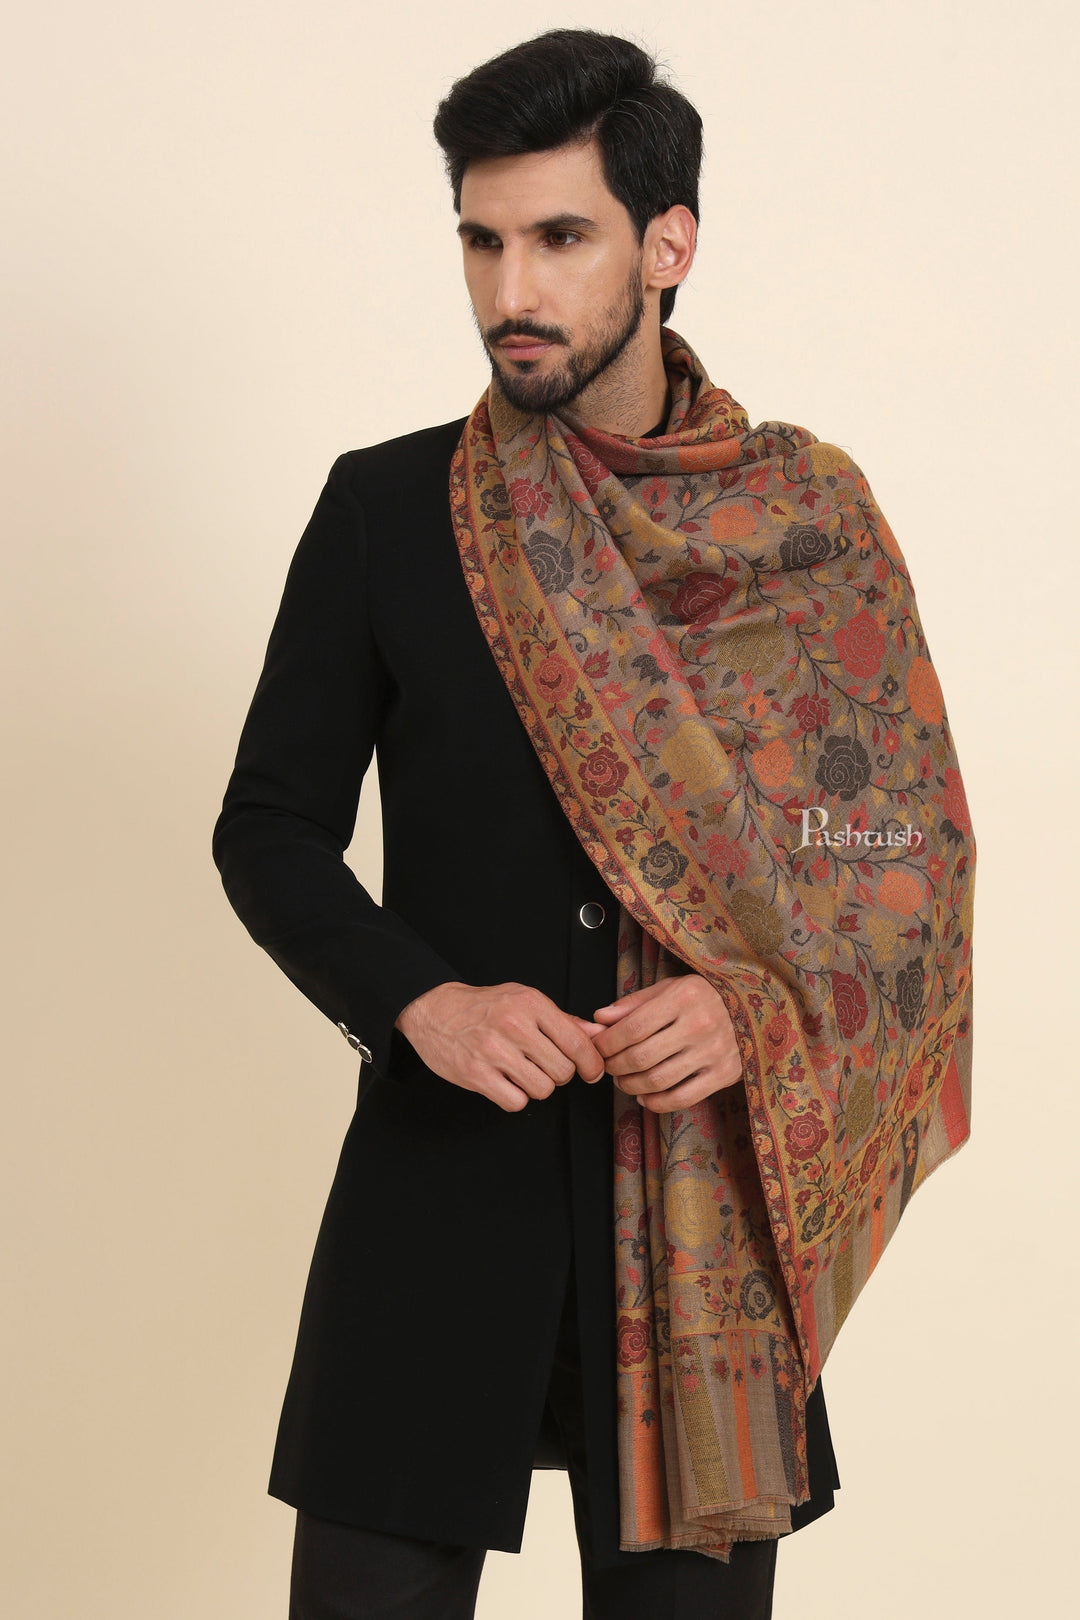 Pashtush India Mens Scarves Stoles and Mufflers Pashtush Mens Extra Fine Wool Stole, Gulabdar Woven Design, Taupe